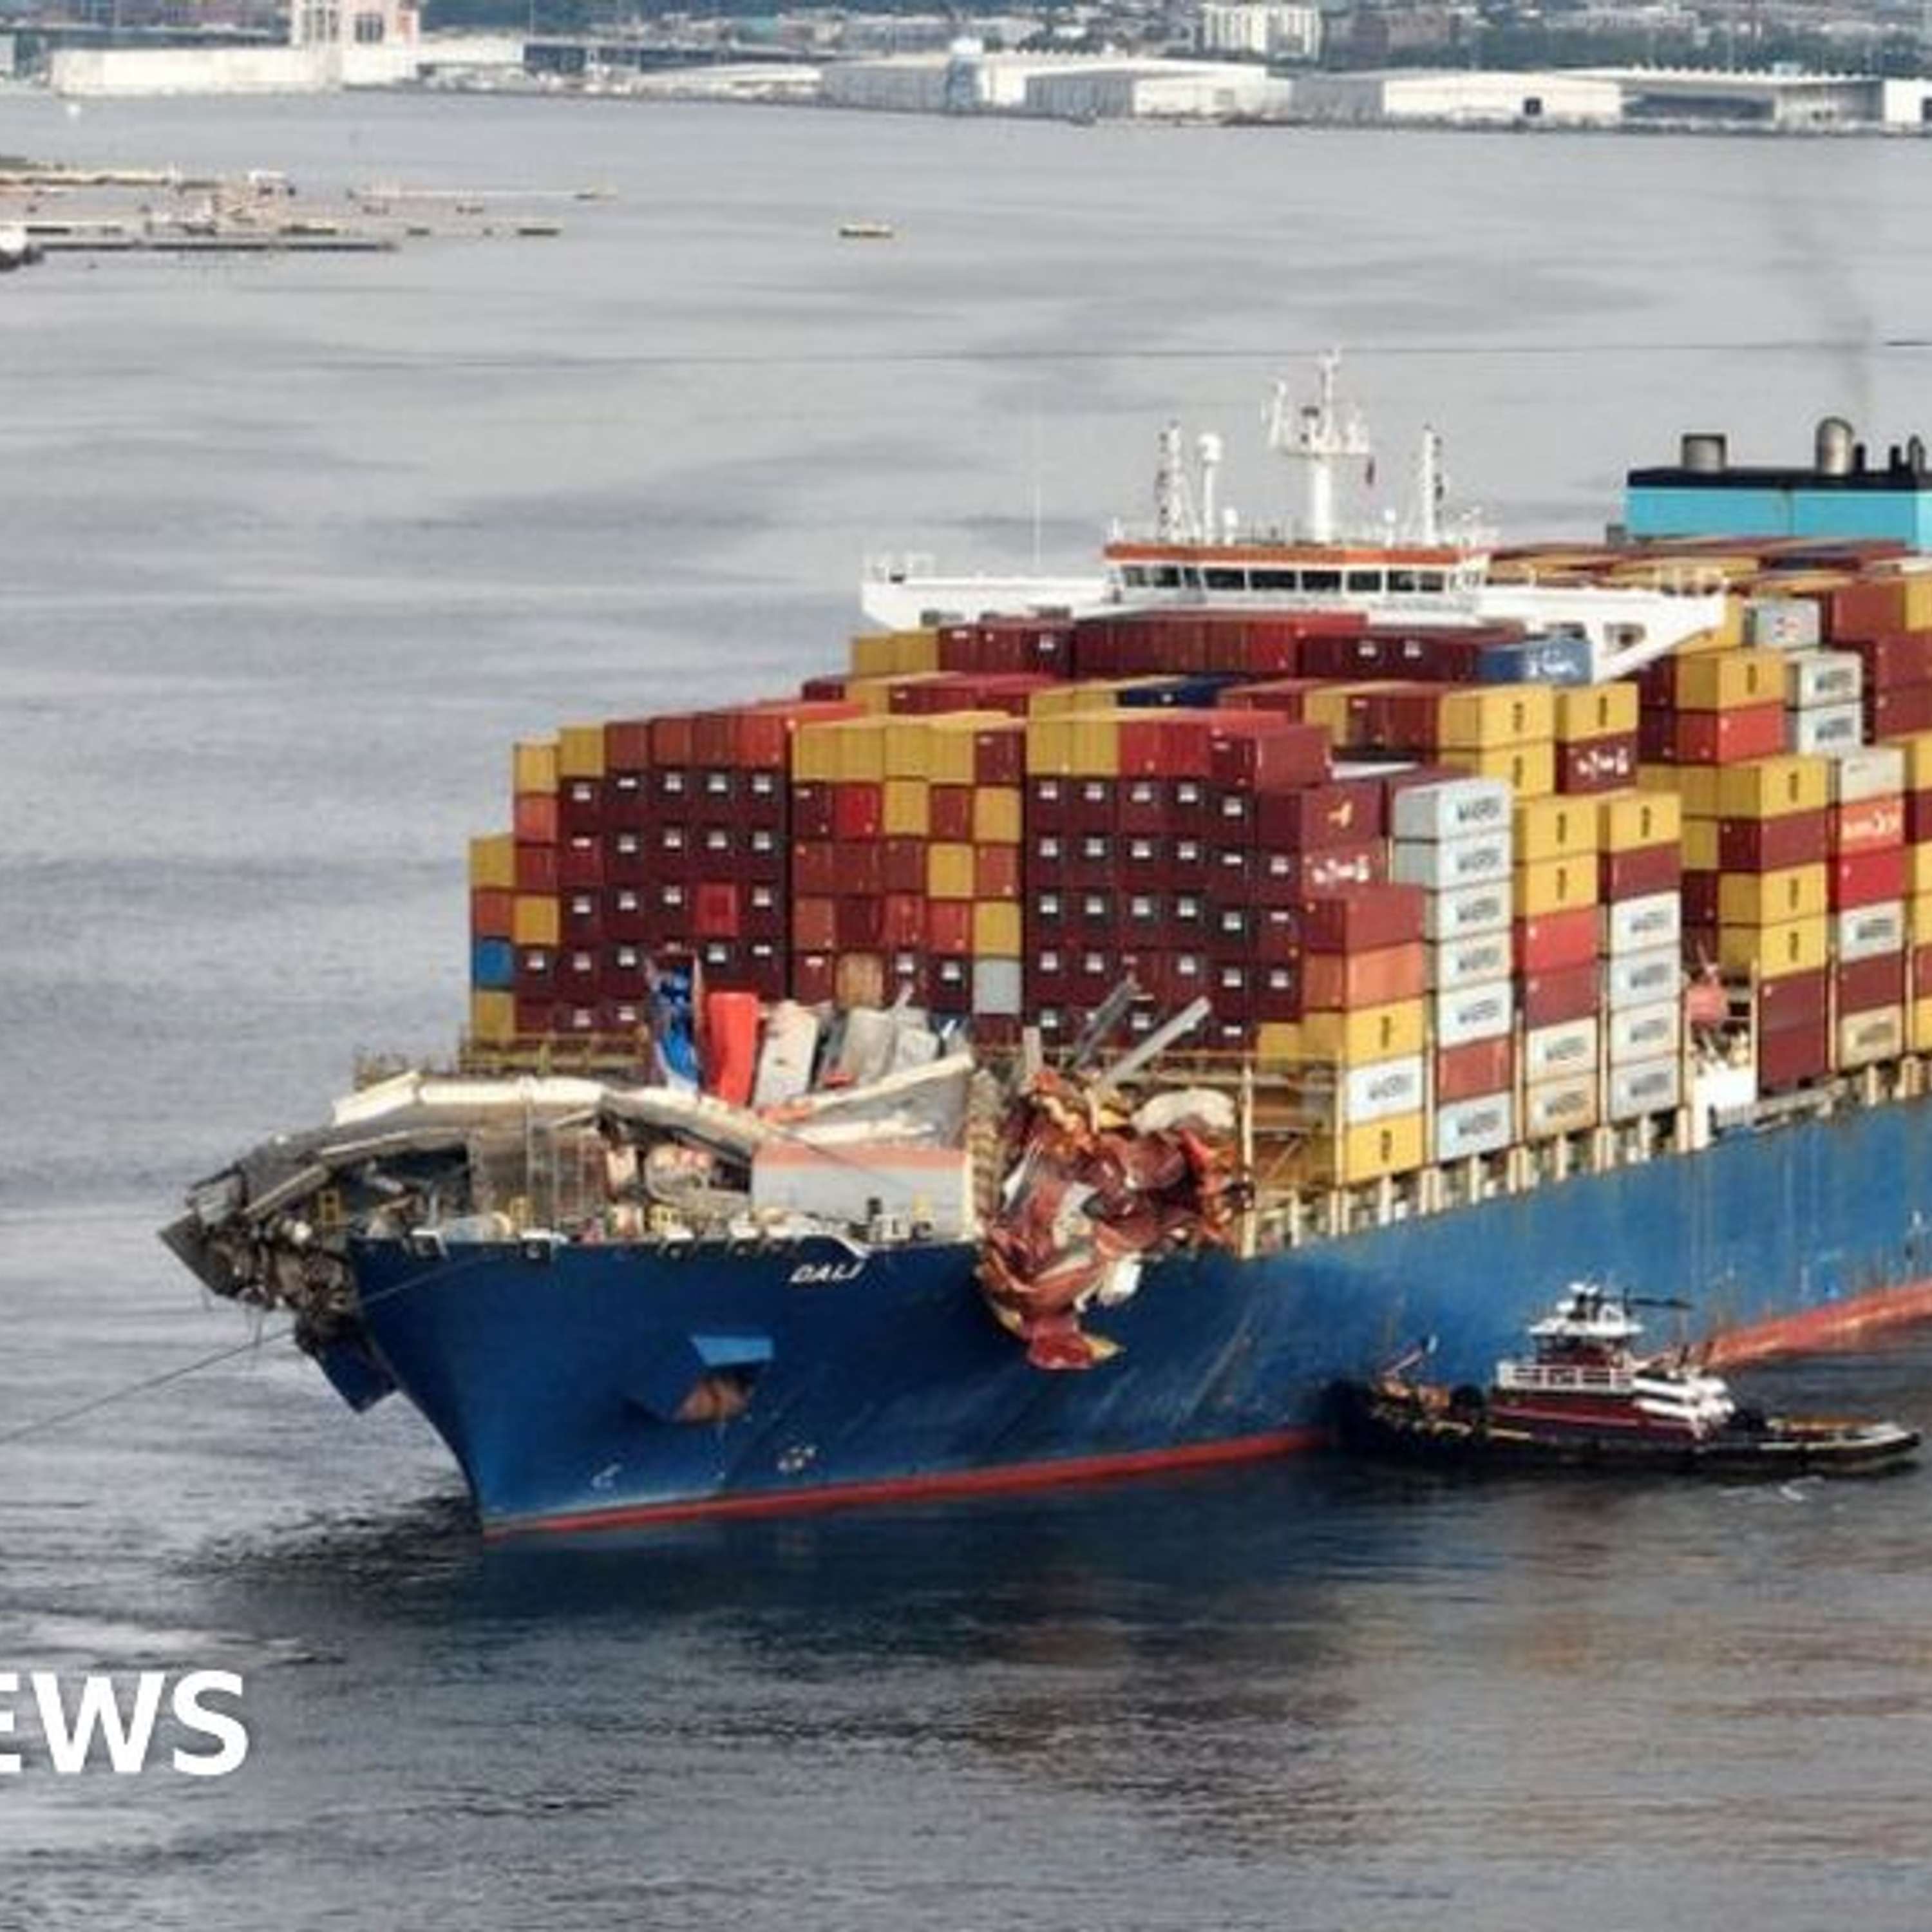 Baltimore Bridge Ship Refloated, Assange Appeals US Extradition, 90-year-old man Reaches Space, Cohen Admits Theft in Testimony, and more...